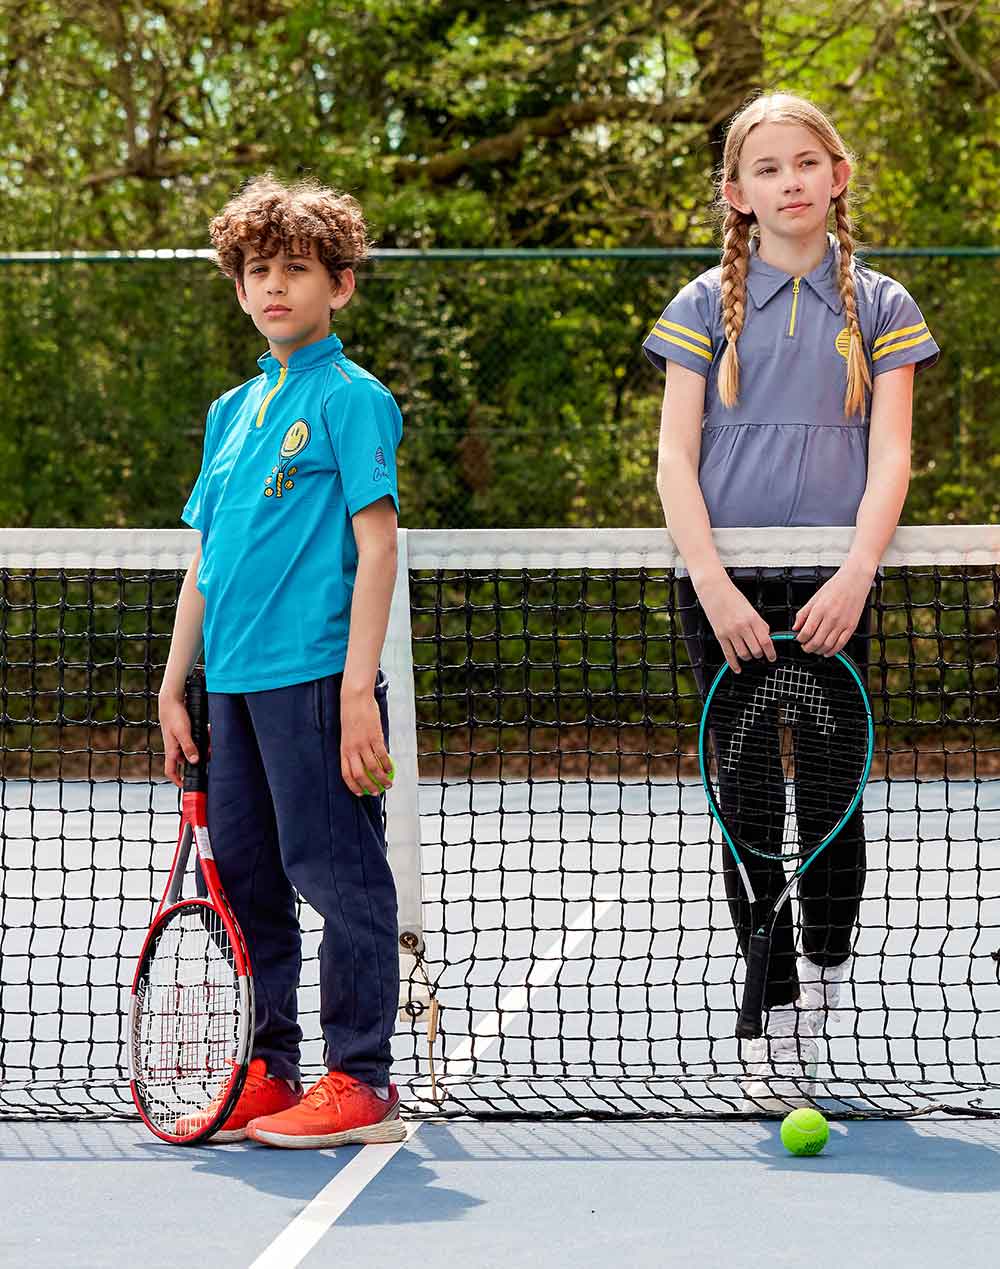 A young boy and girl stood on a tennis court